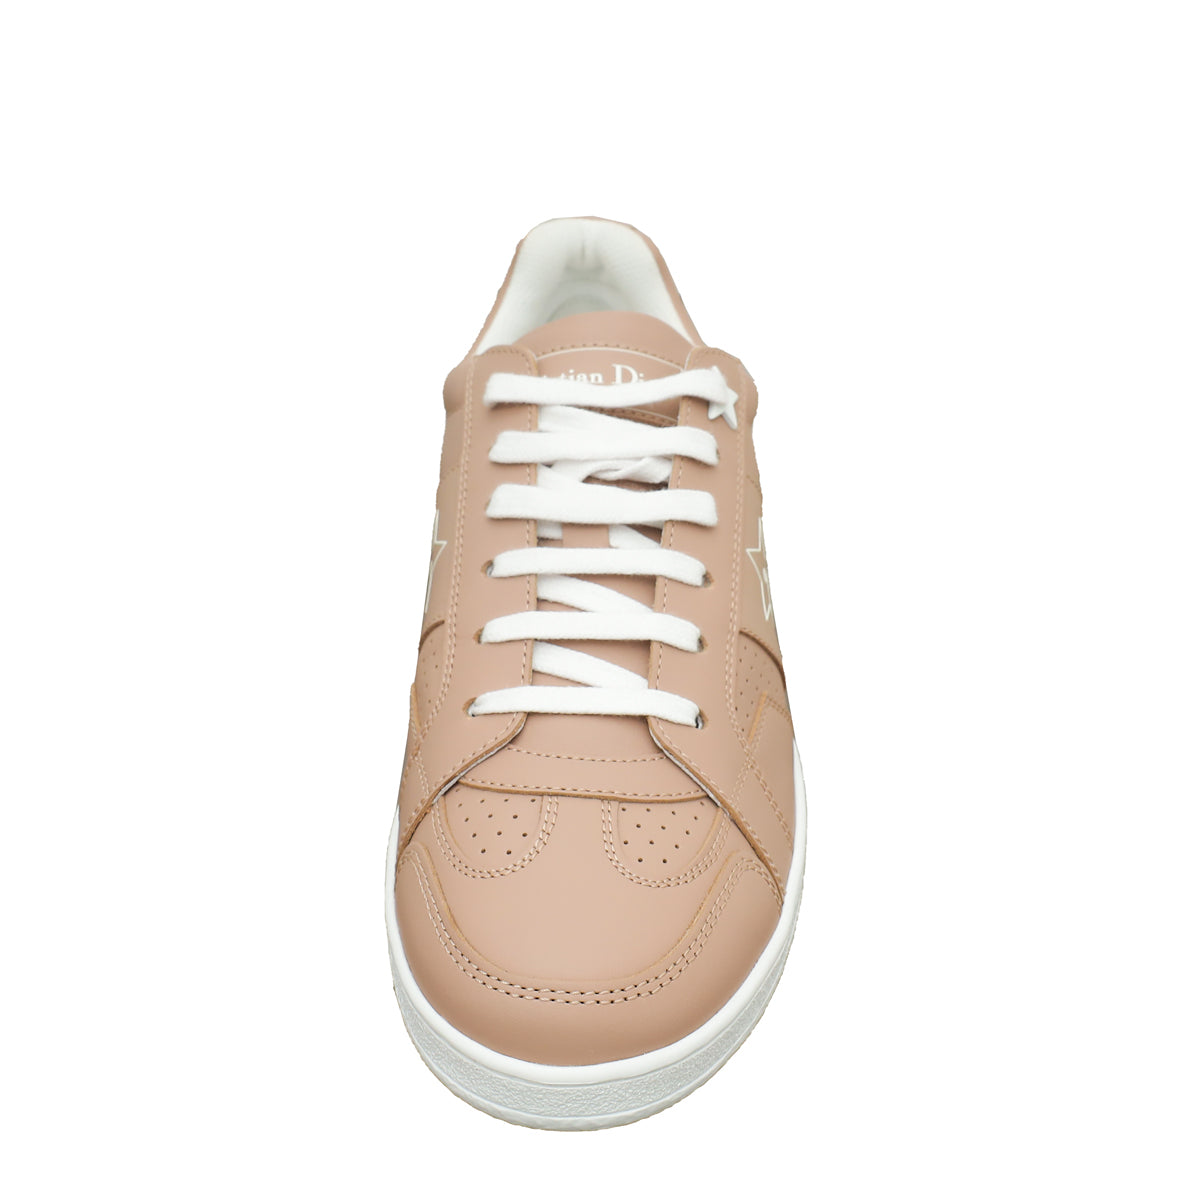 Christian Dior Dusty Pink Star Sneaker 37